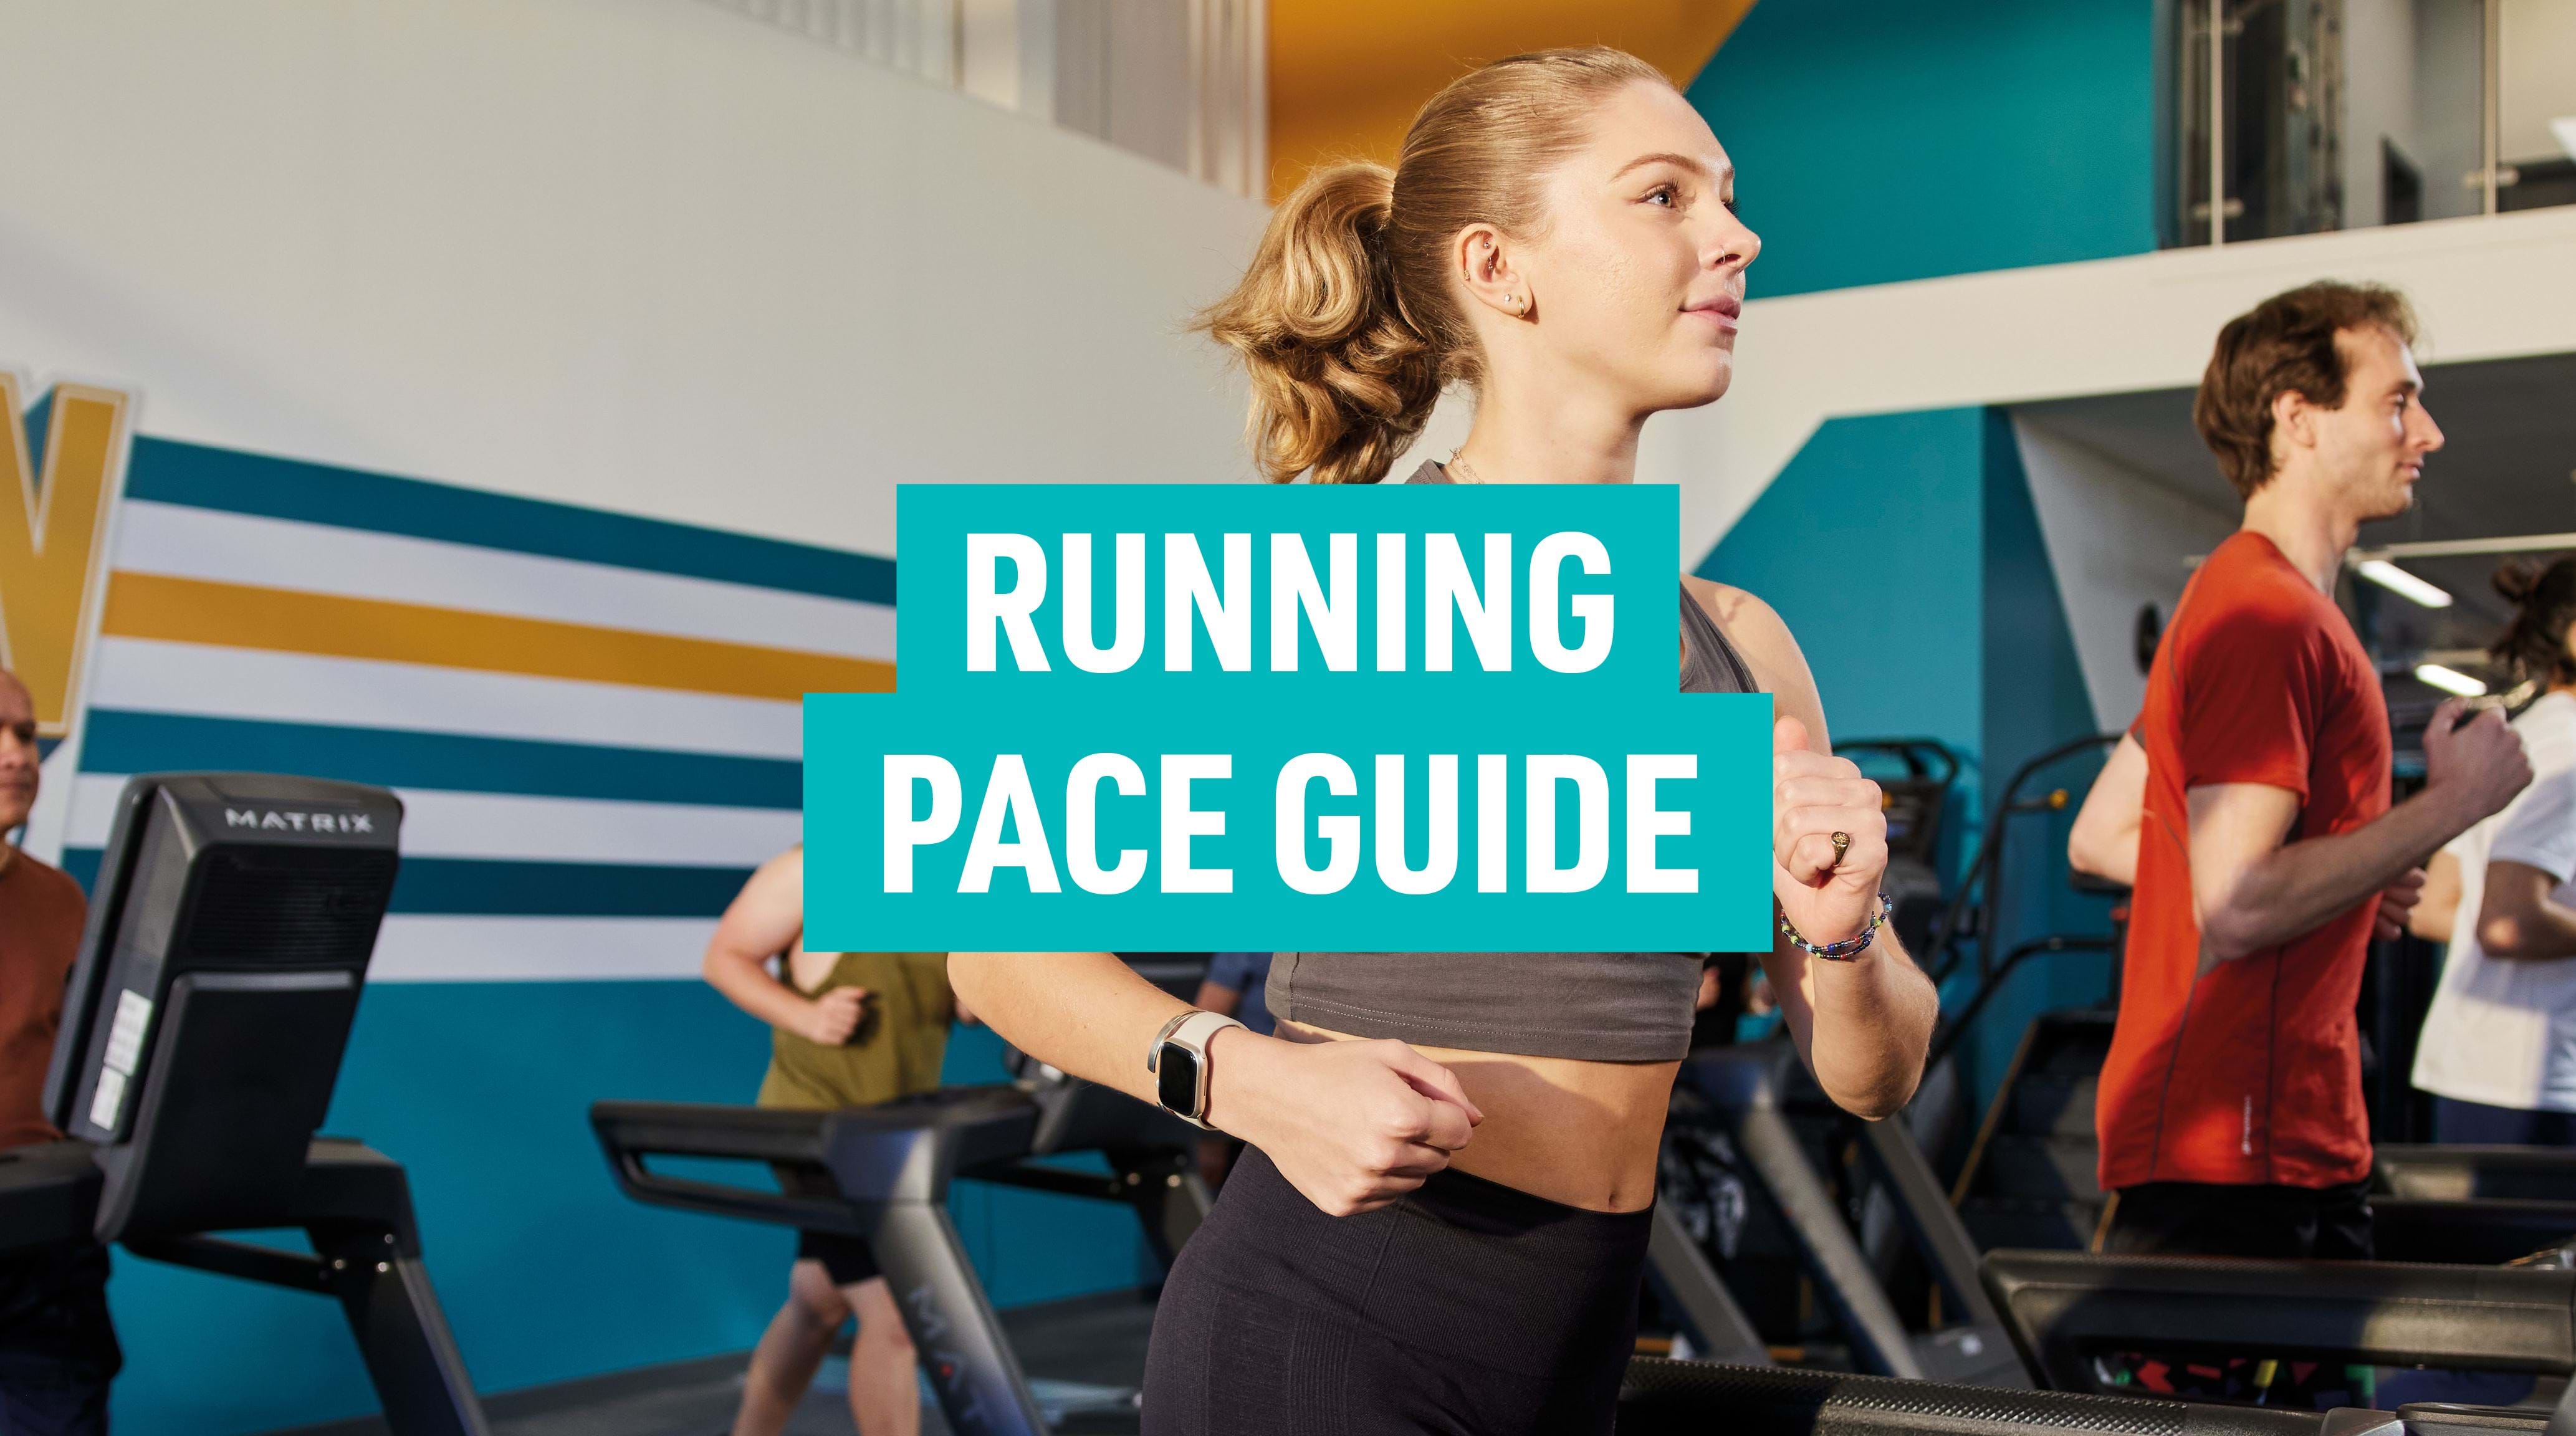 Pace or effort based: What is the right strategy for running